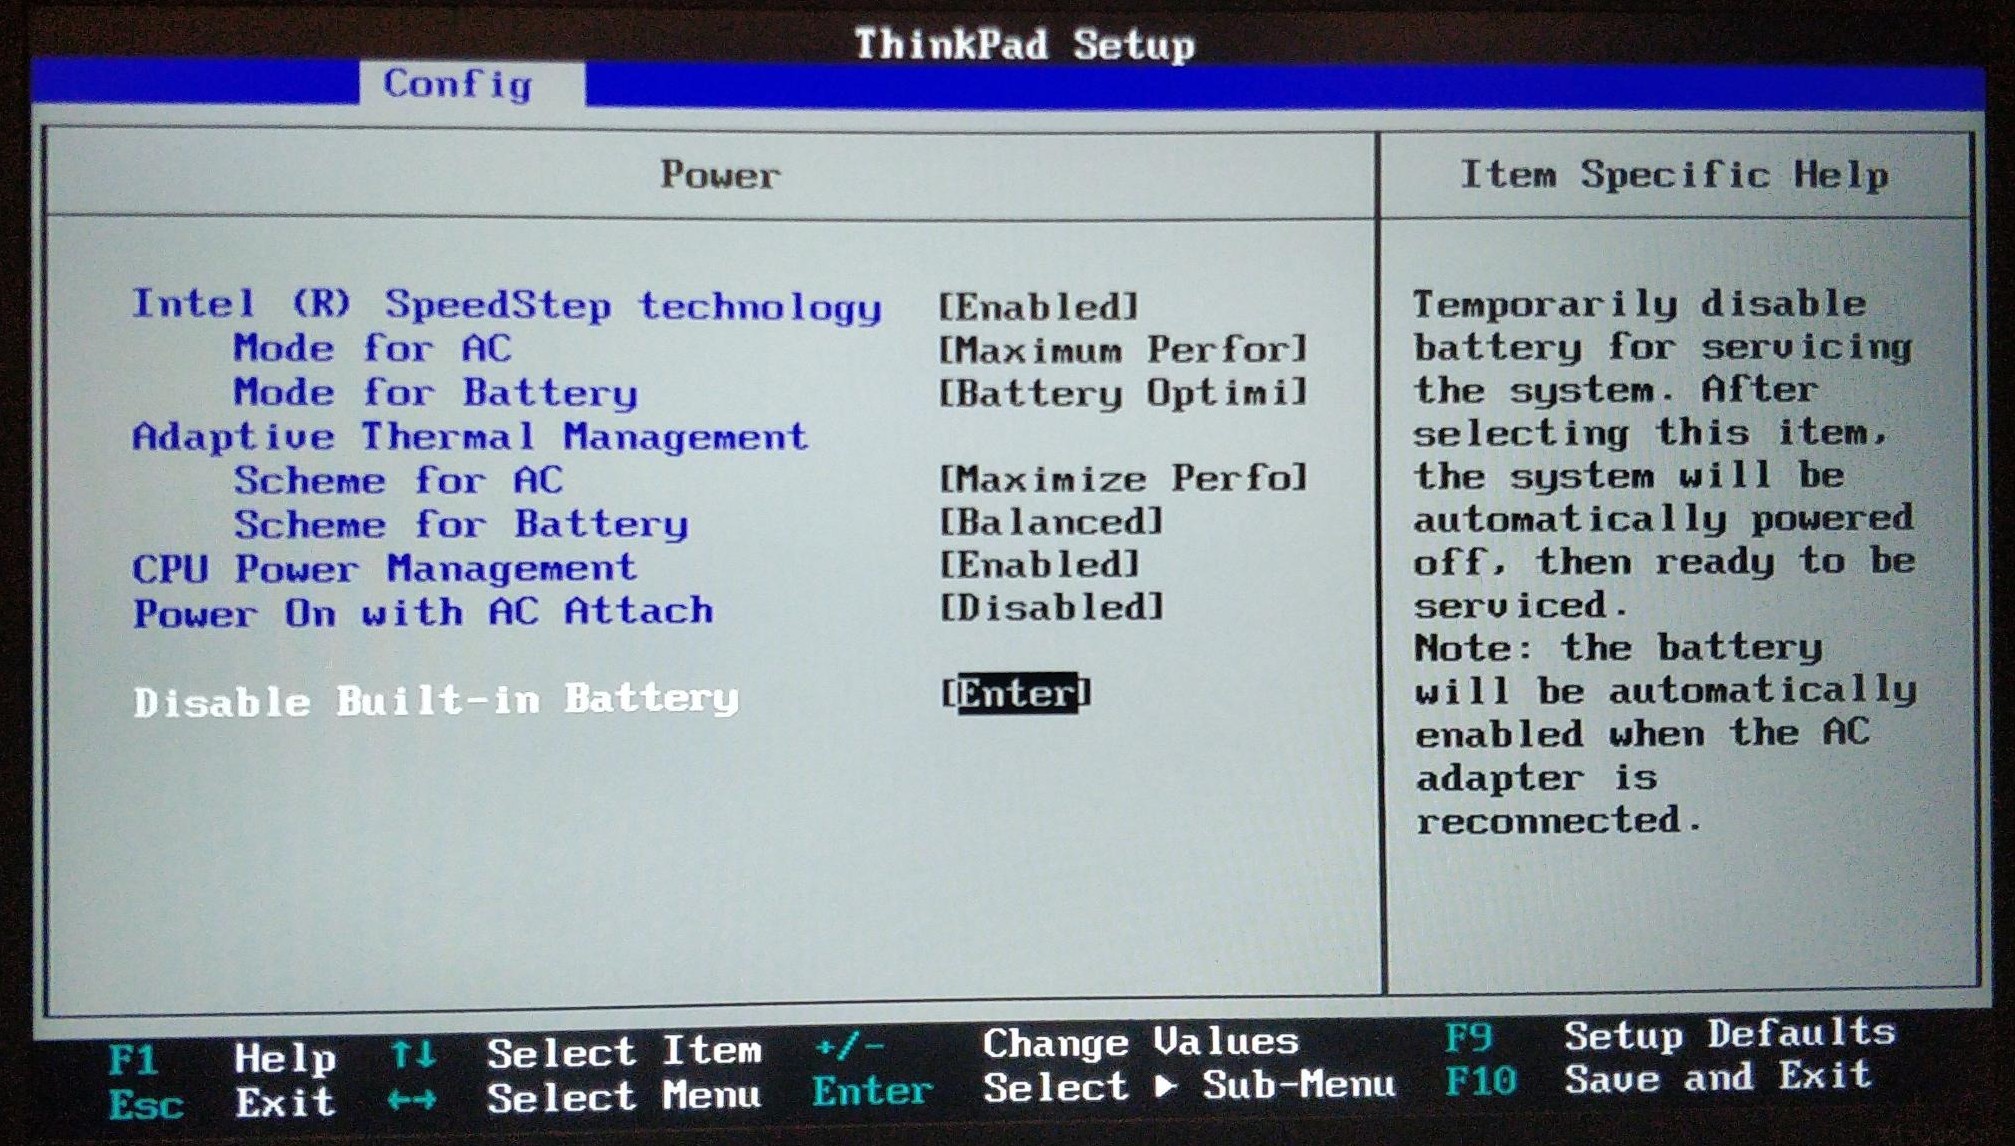 Disabling the battery in the BIOS